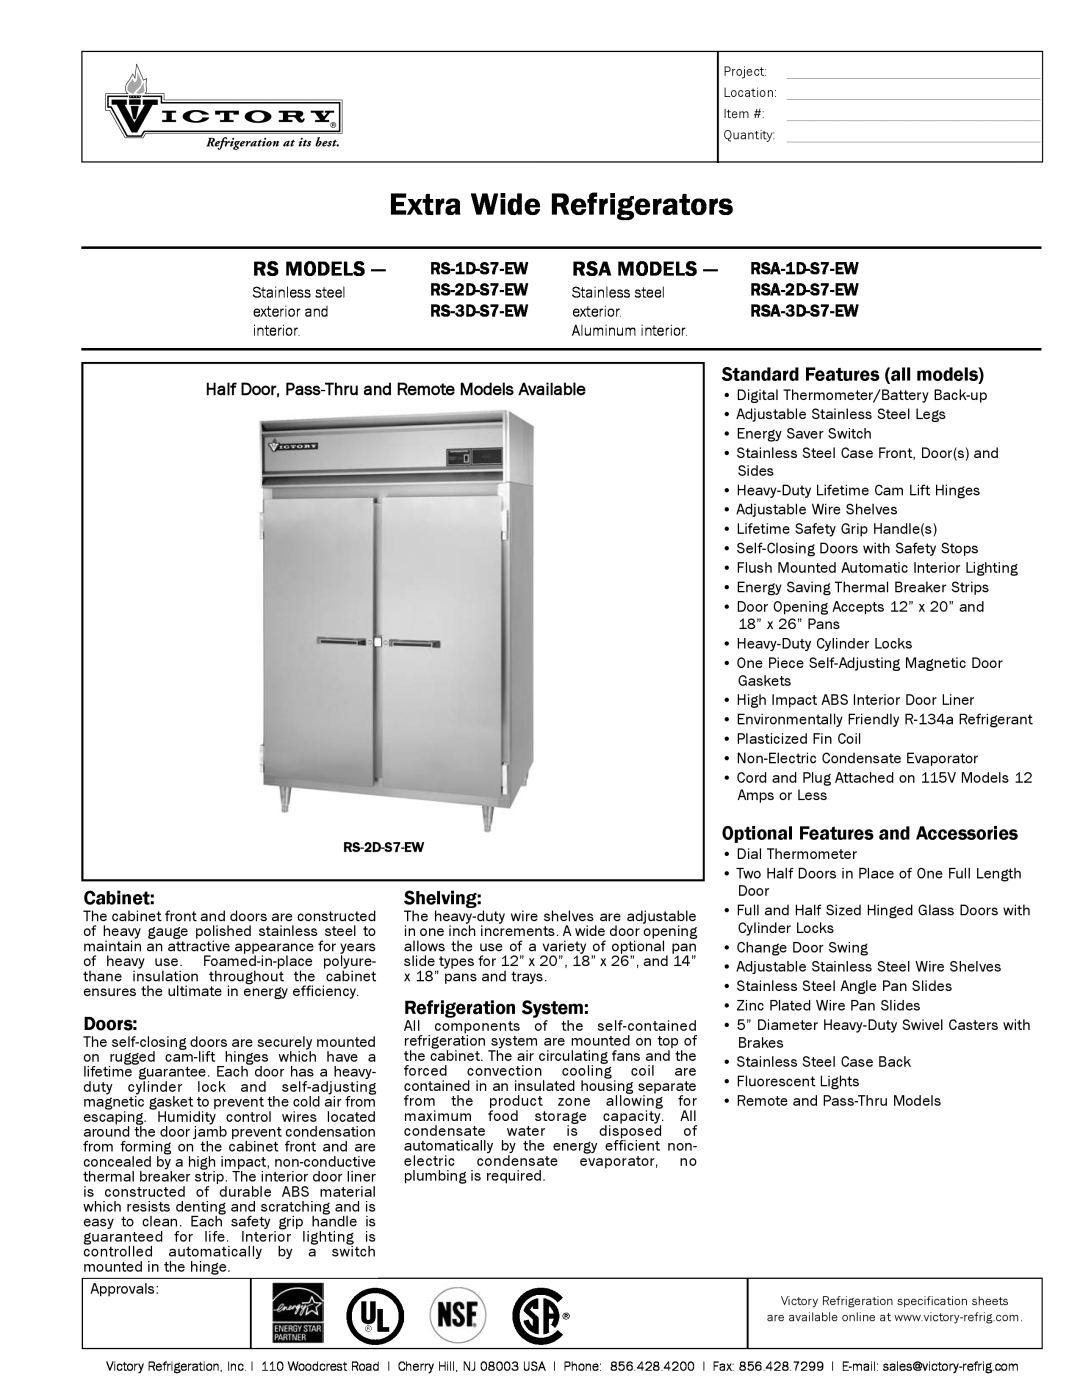 Victory Refrigeration RSA-1D-S7-EW specifications Half Door, Pass-Thru and Remote Models Available, Rs Models, Rsa Models 